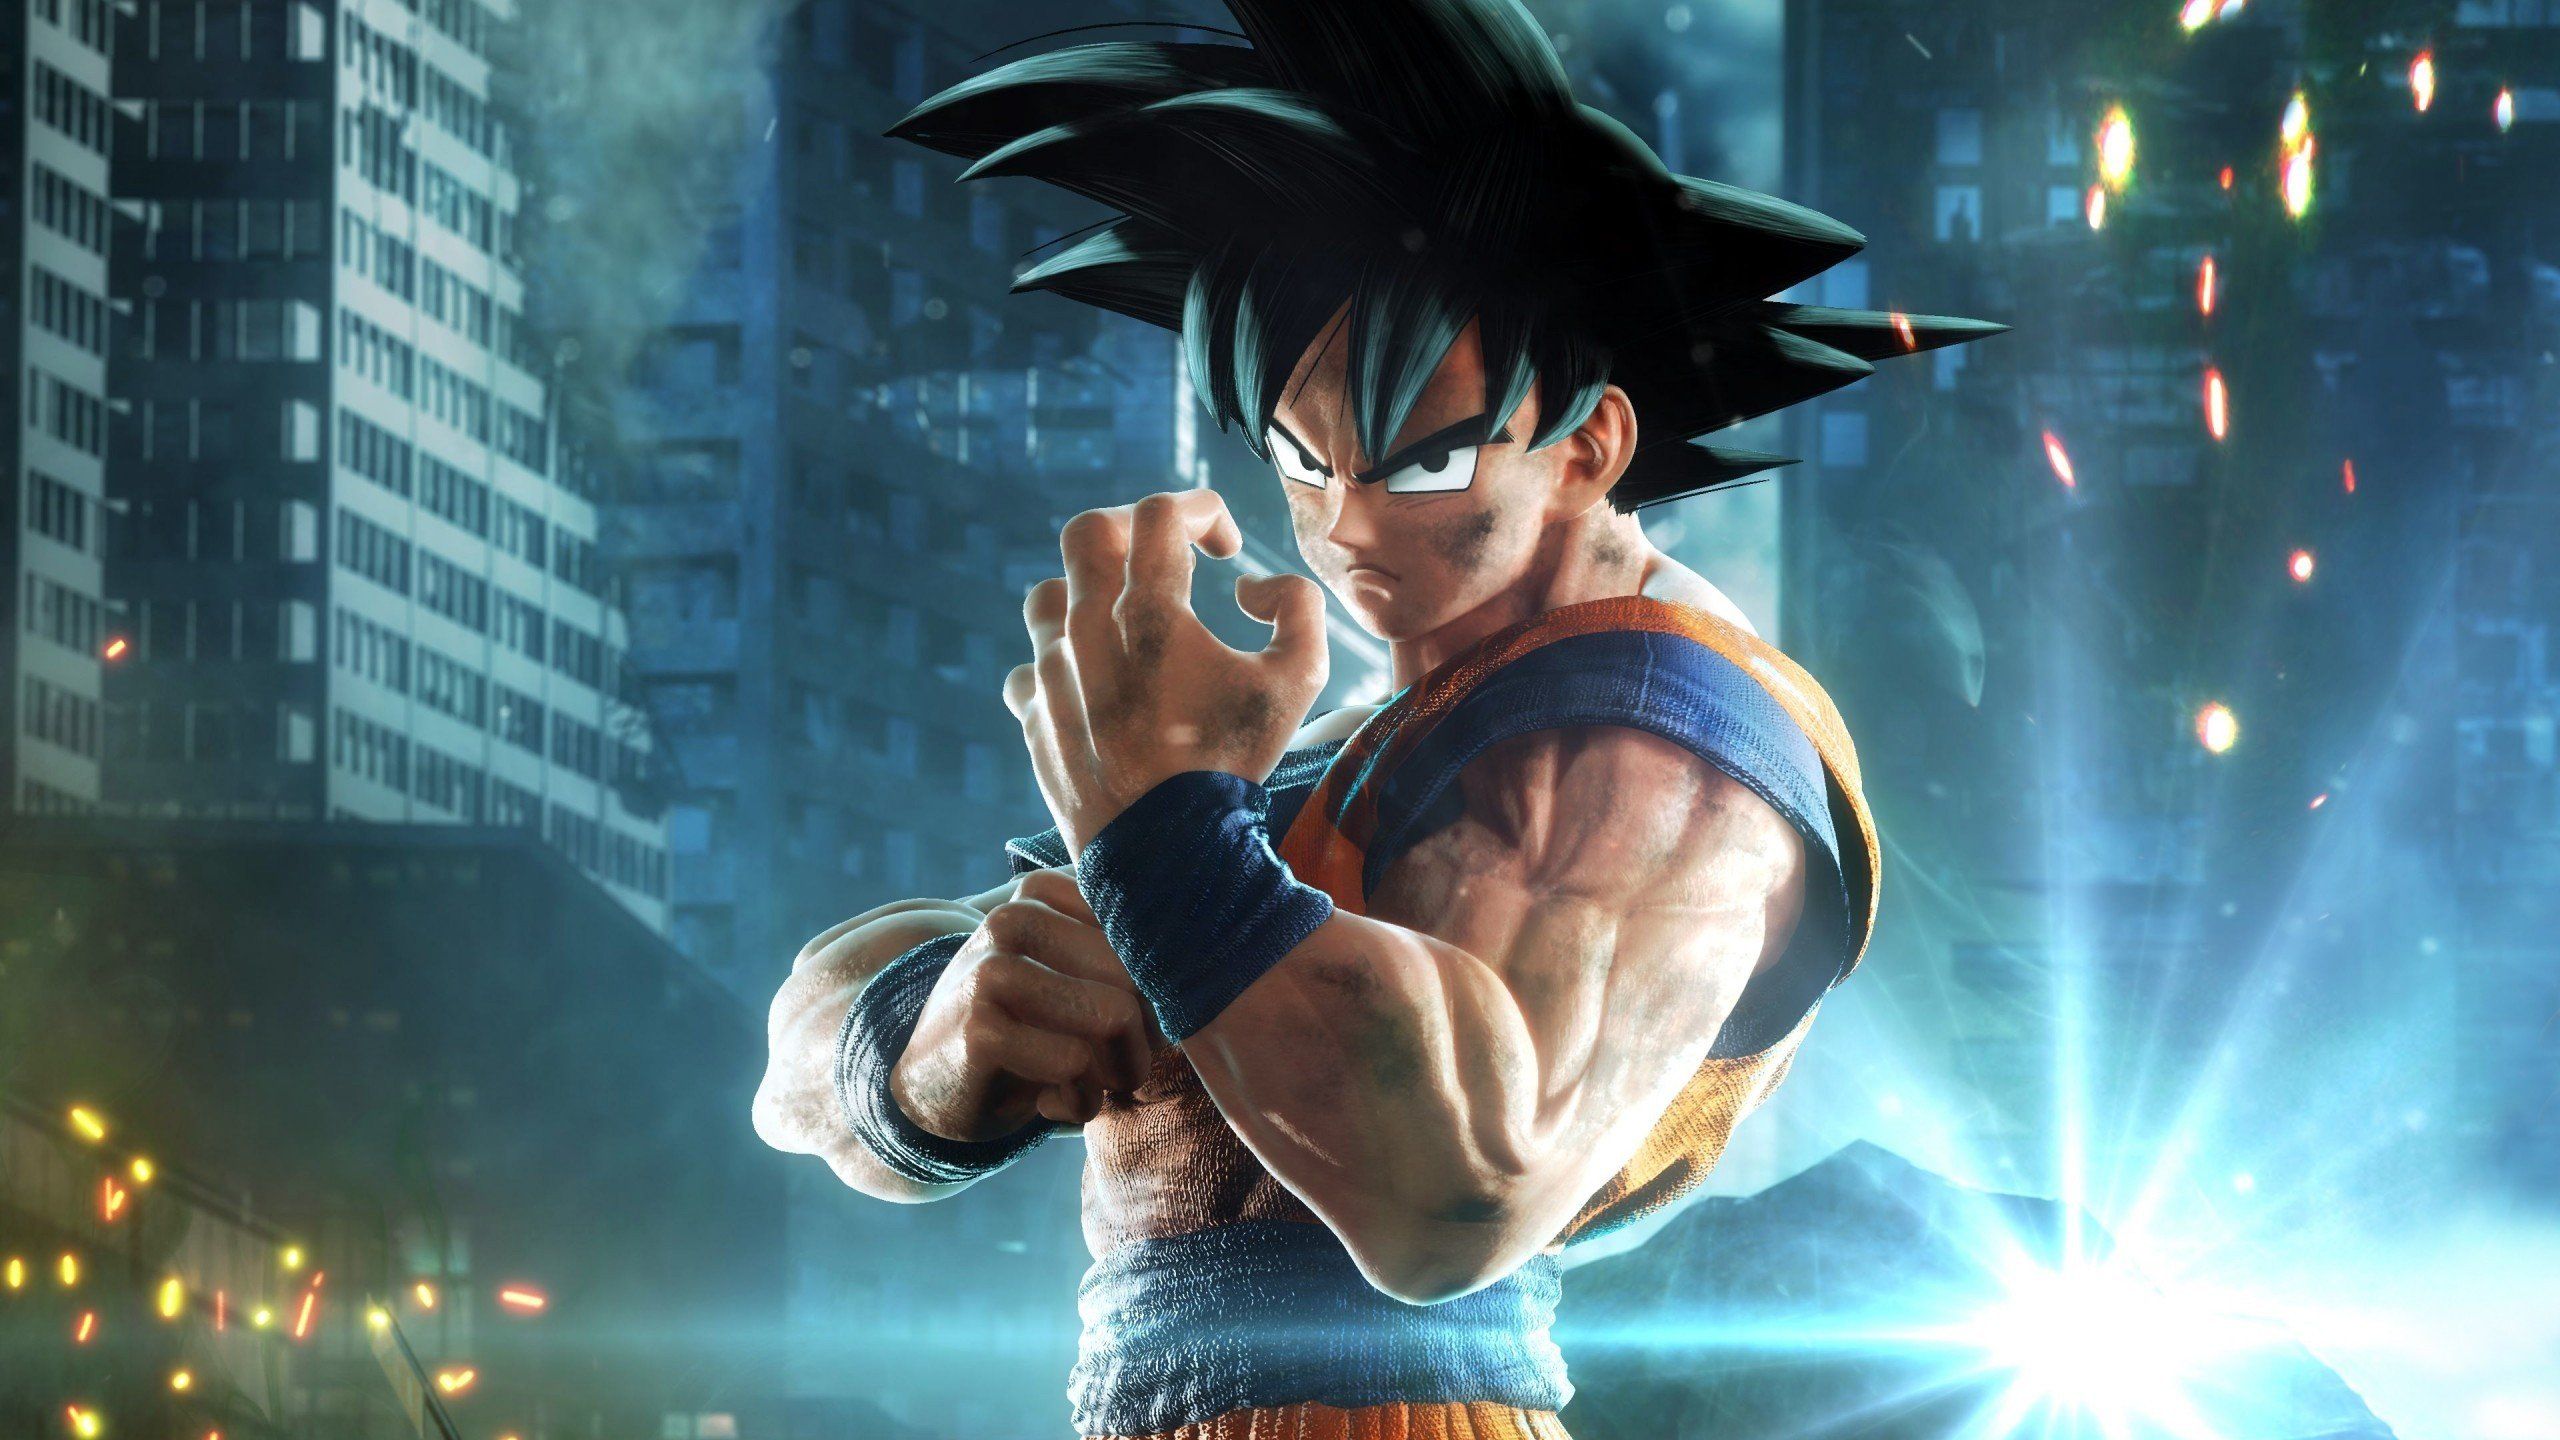 7680x4320 8k Goku Dragon Ball Super 8k HD 4k Wallpapers, Images,  Backgrounds, Photos and Pictures